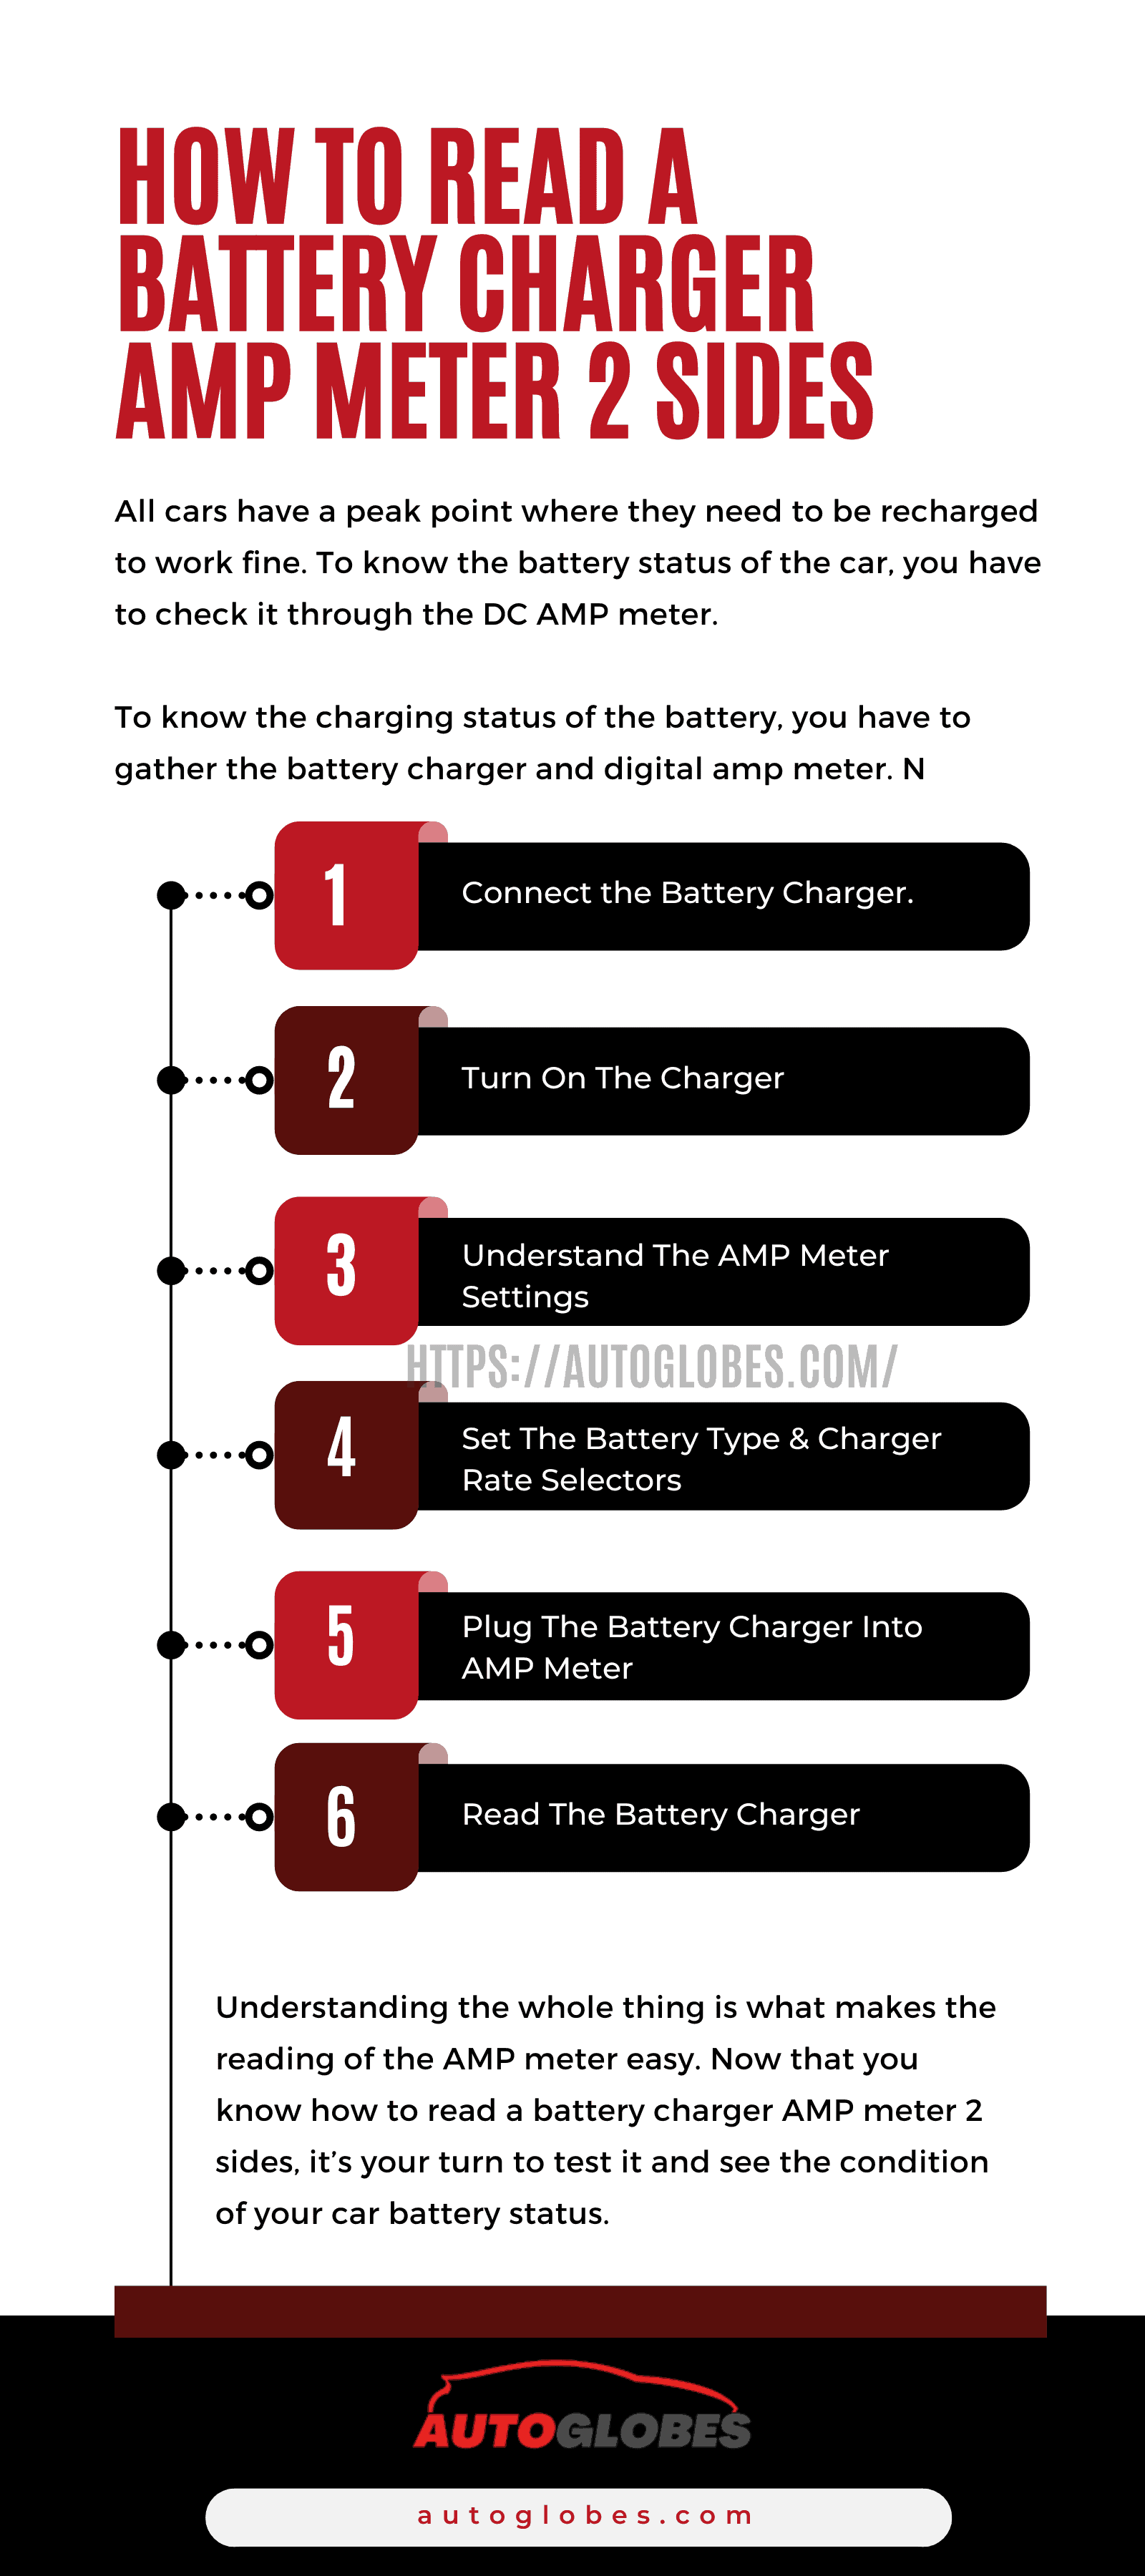 Steps To Read A Battery Charger Amp Meter 2 Sides infographic